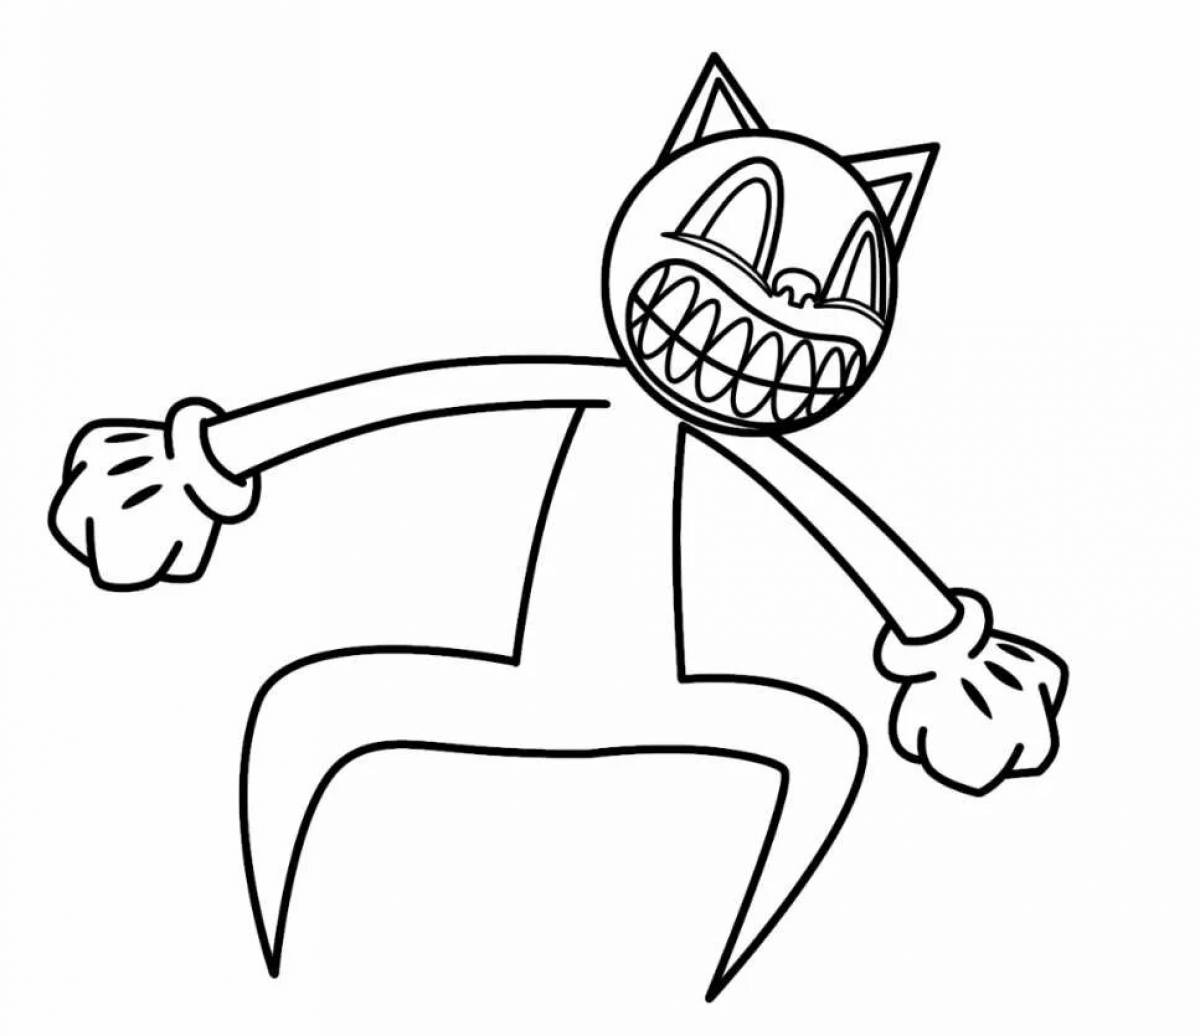 Cat content coloring page